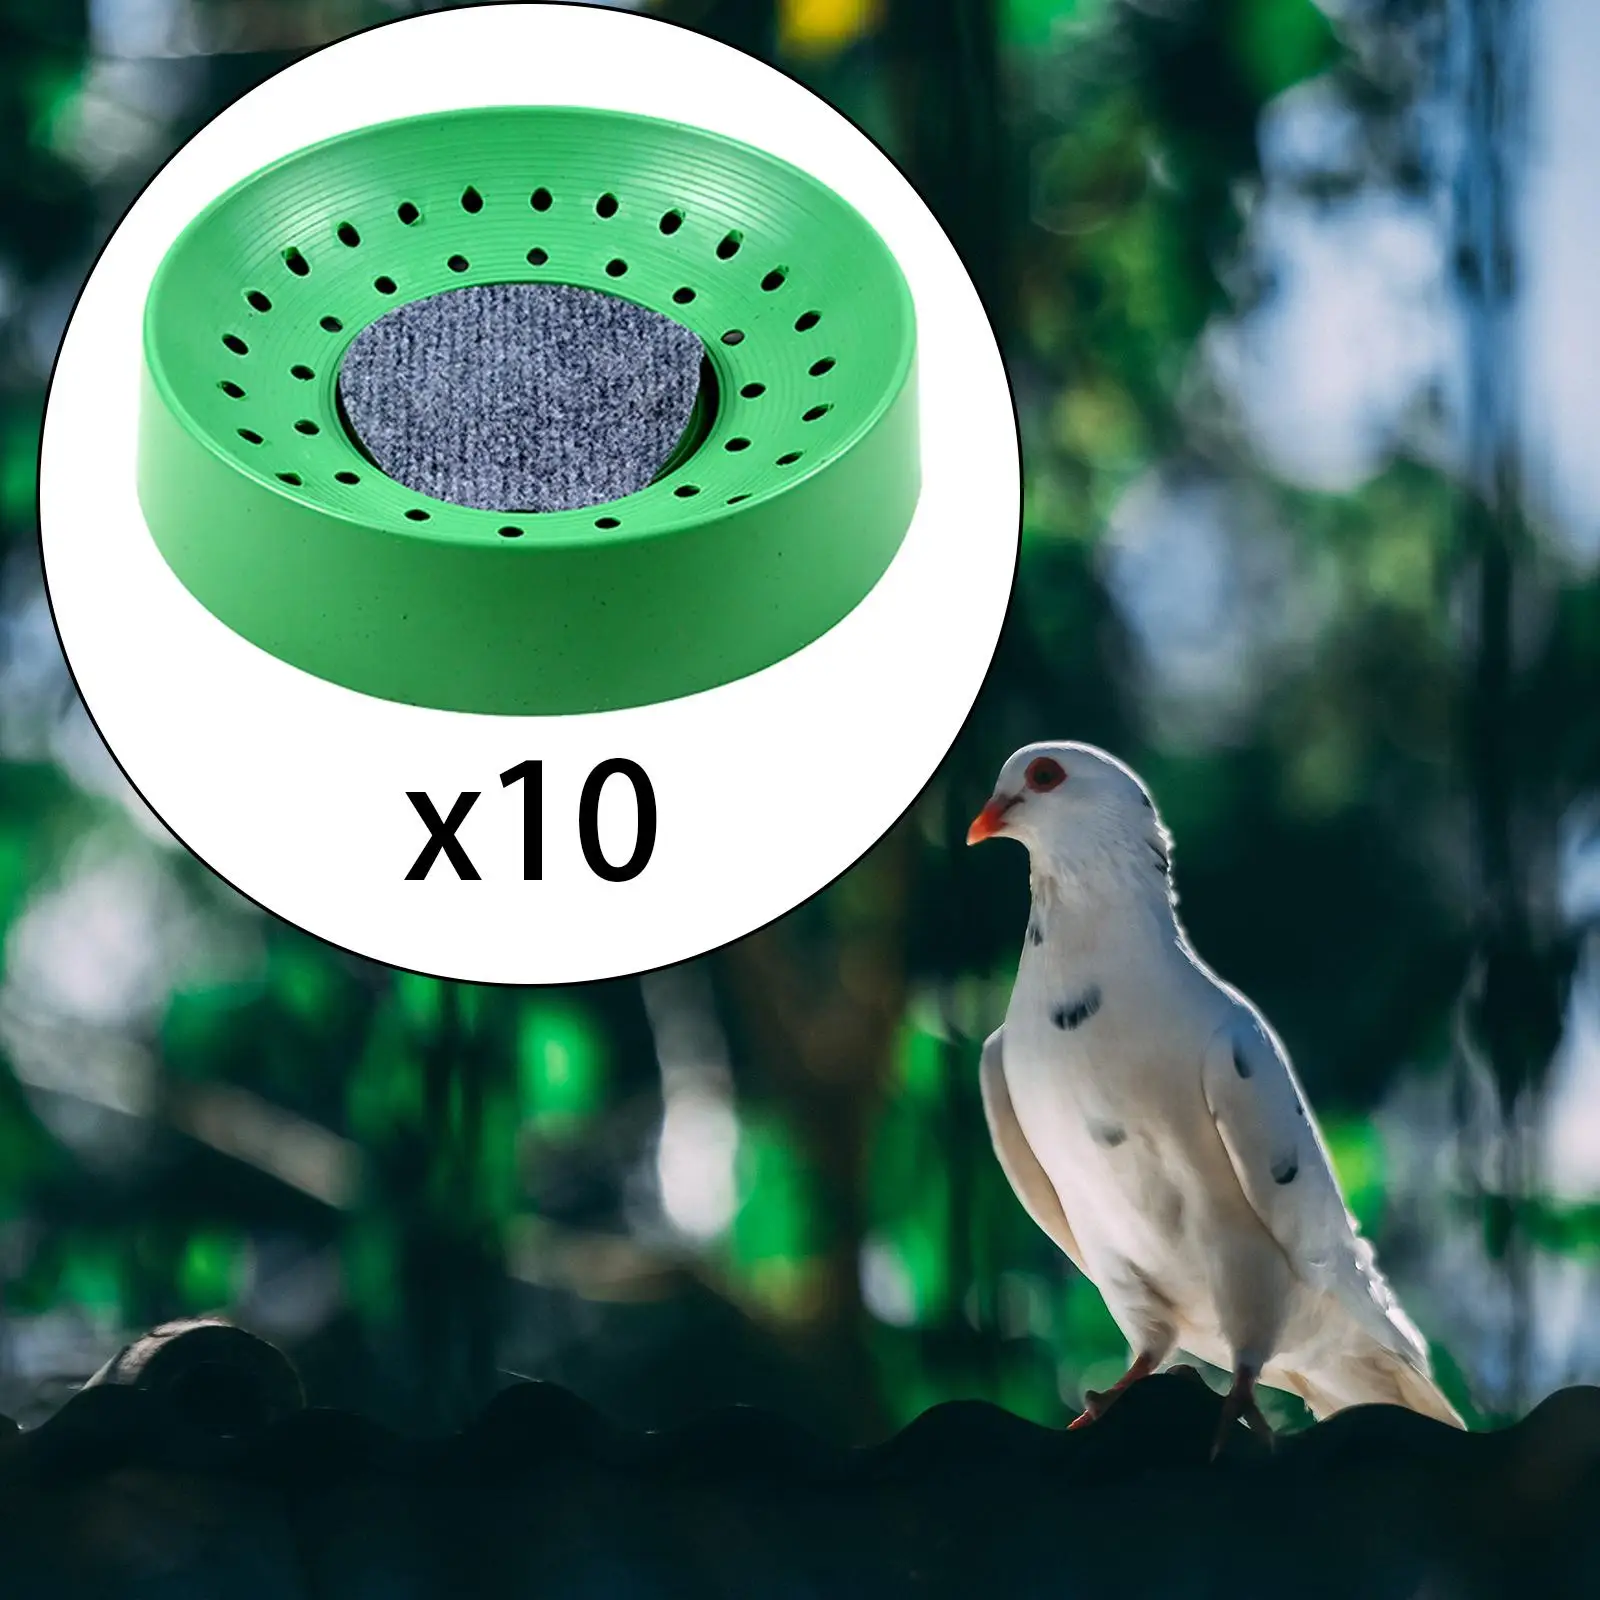 10x Plastic Pigeon Nest with Mat  Nesting Bowl Pigeon Den for Small Birds Quails